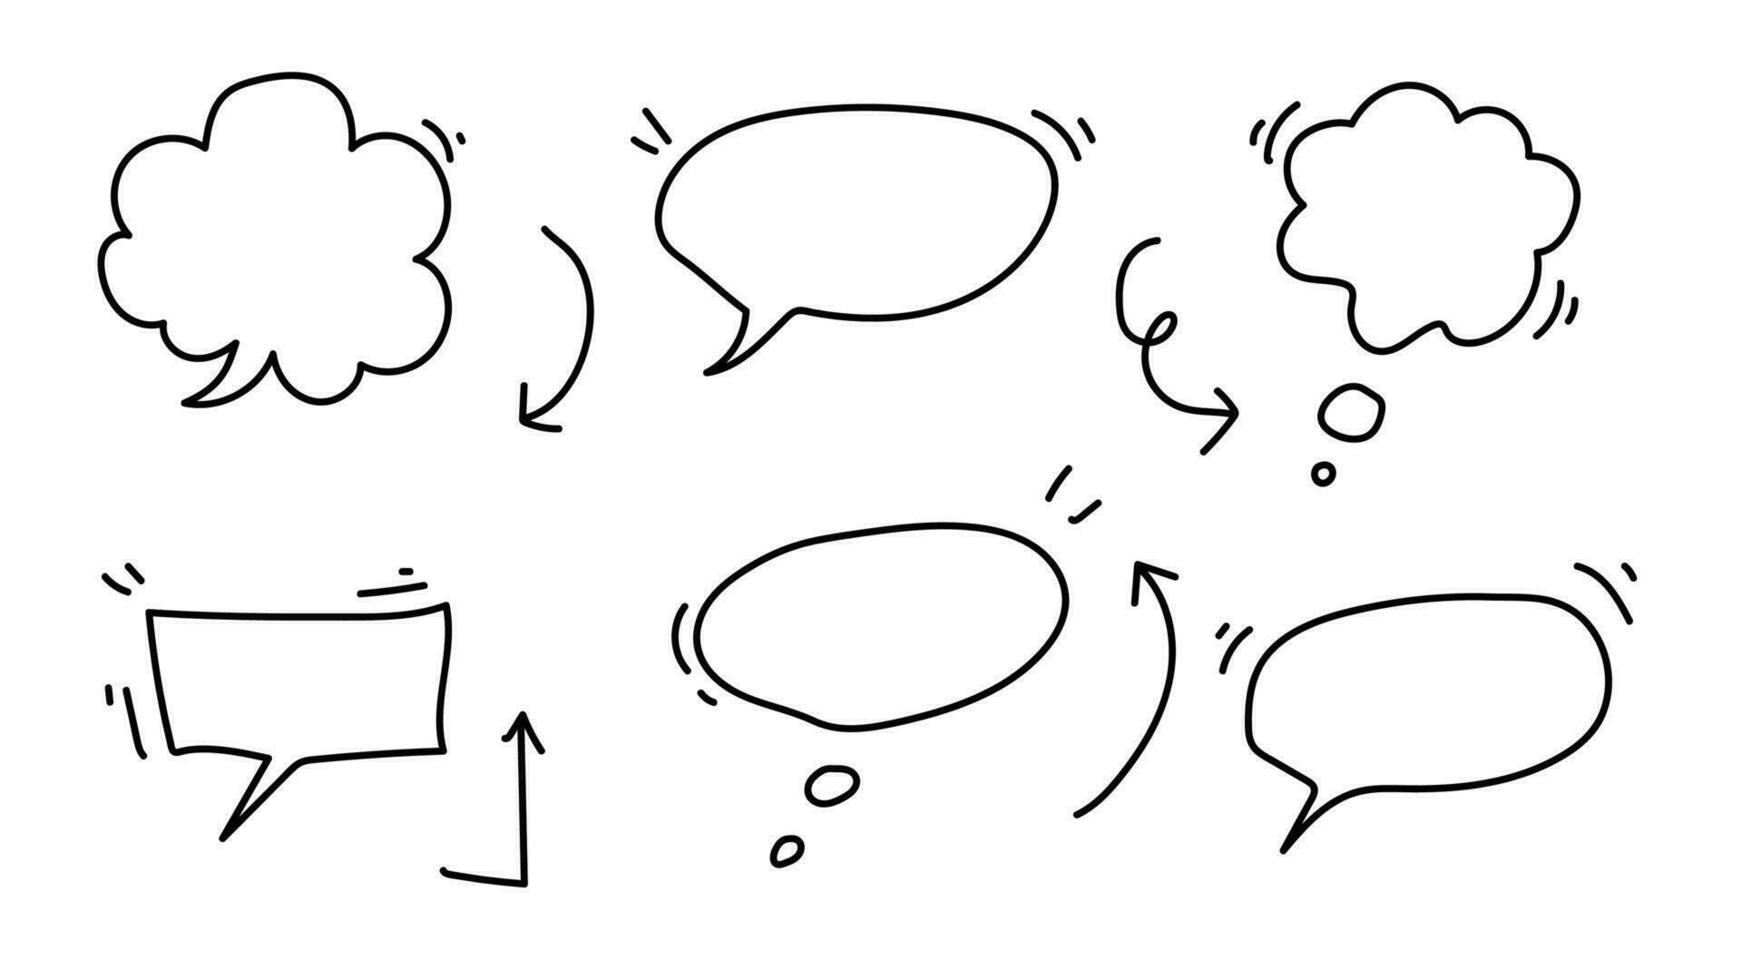 hand drawn speech bubble set with black on white background vector